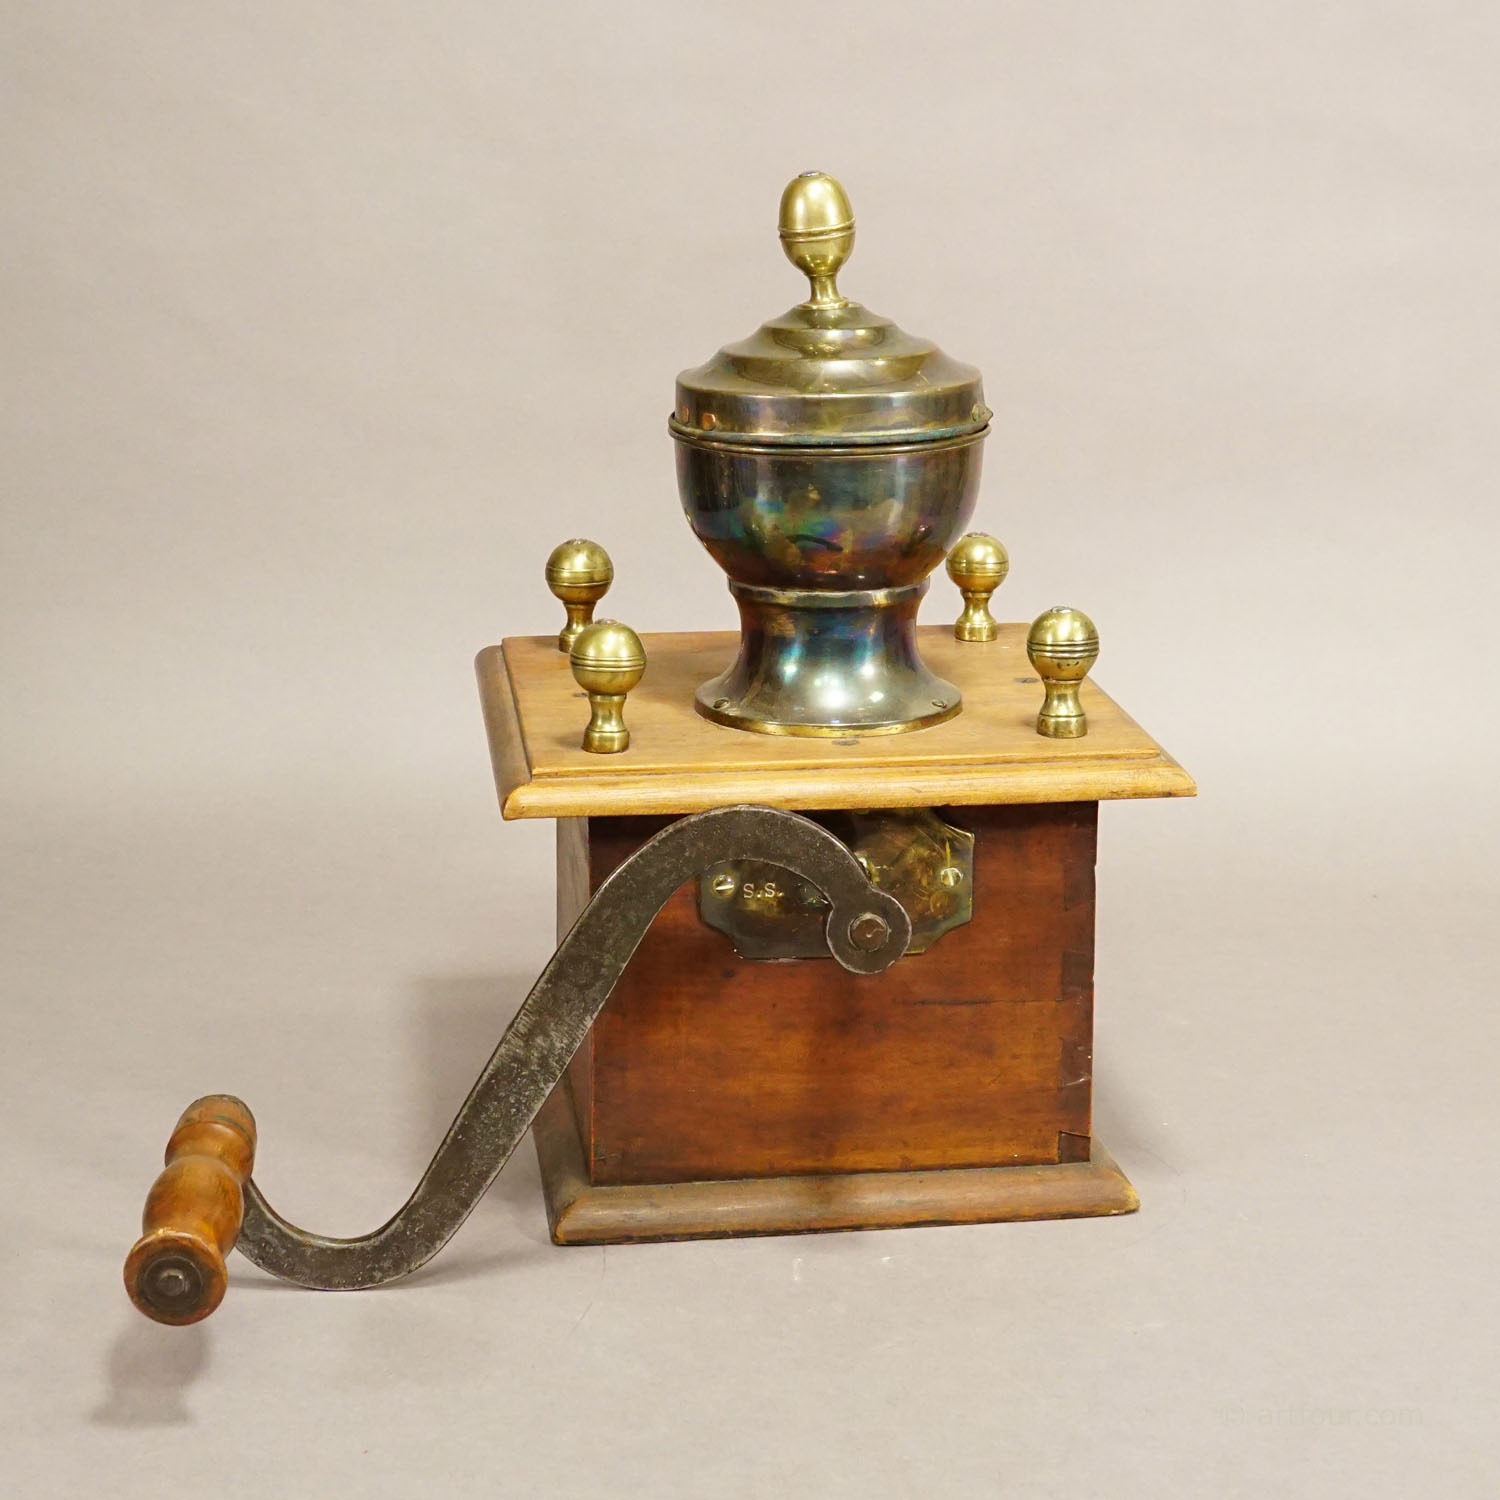 A Large Antique Coffee Grinder, Germany ca. 1900s